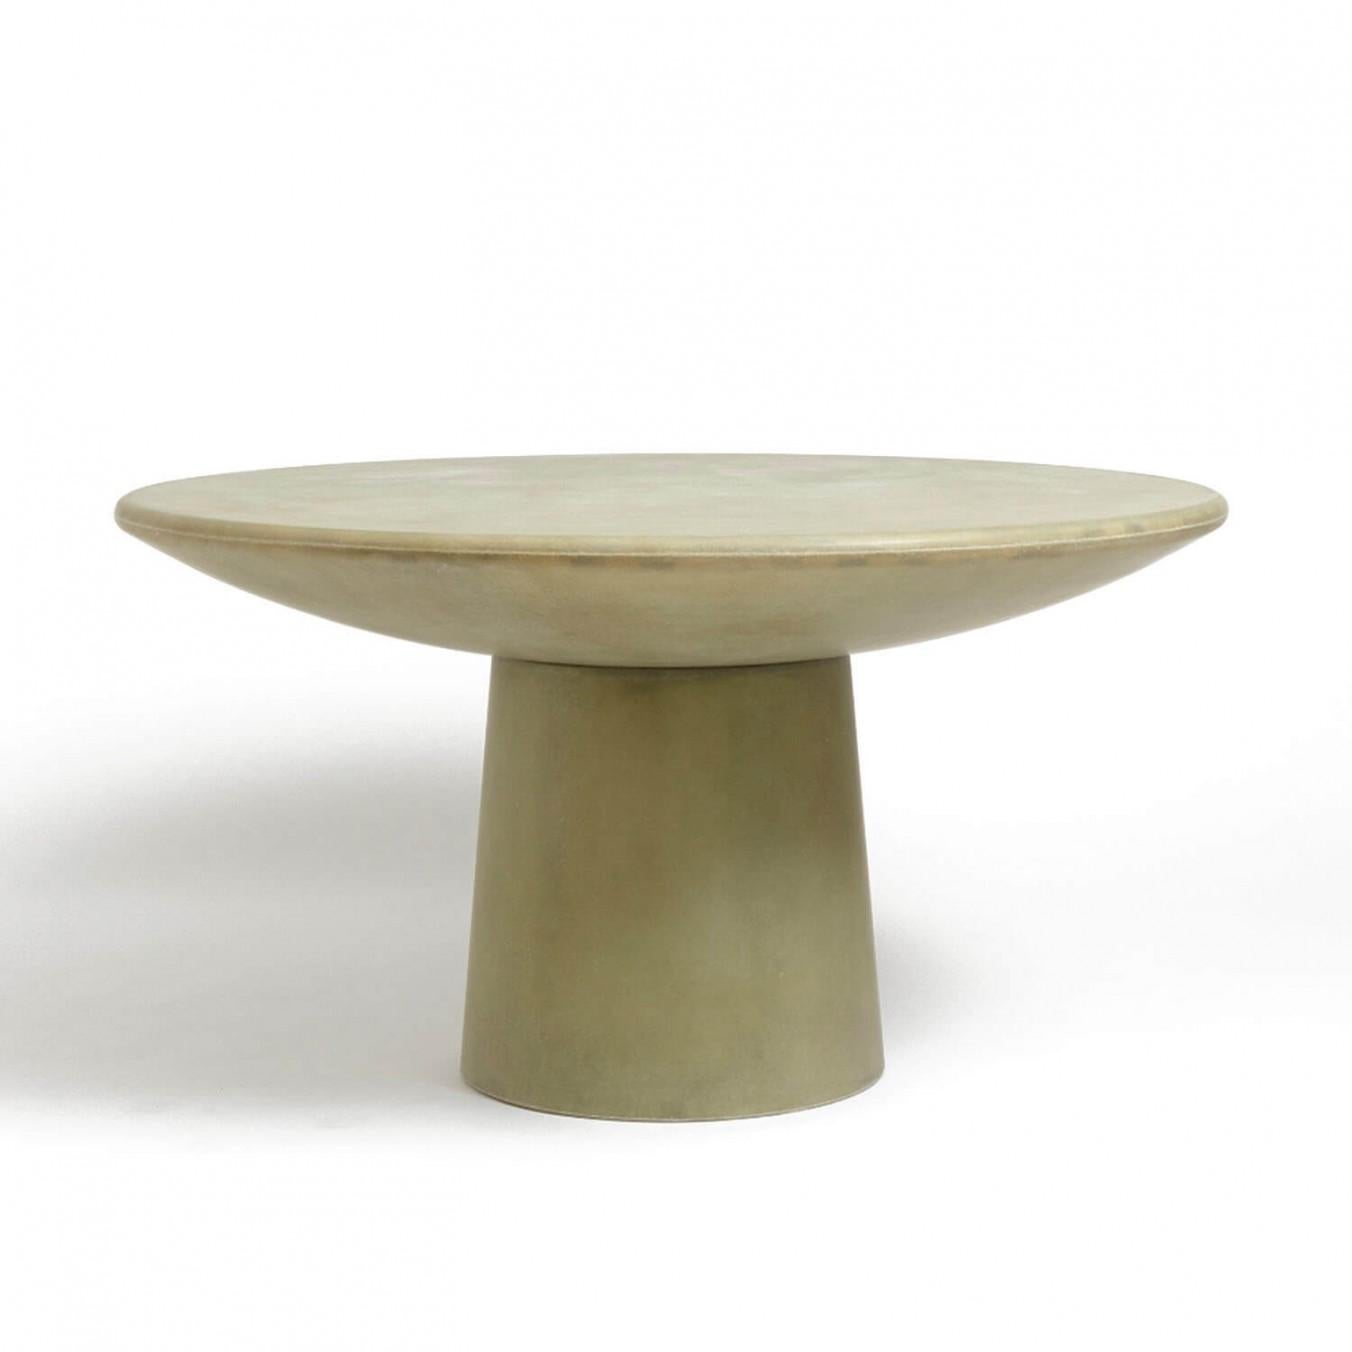 Contemporary Fiberglass Small Dining Table, Roly-Poly Chestnut by Faye Toogood For Sale 2